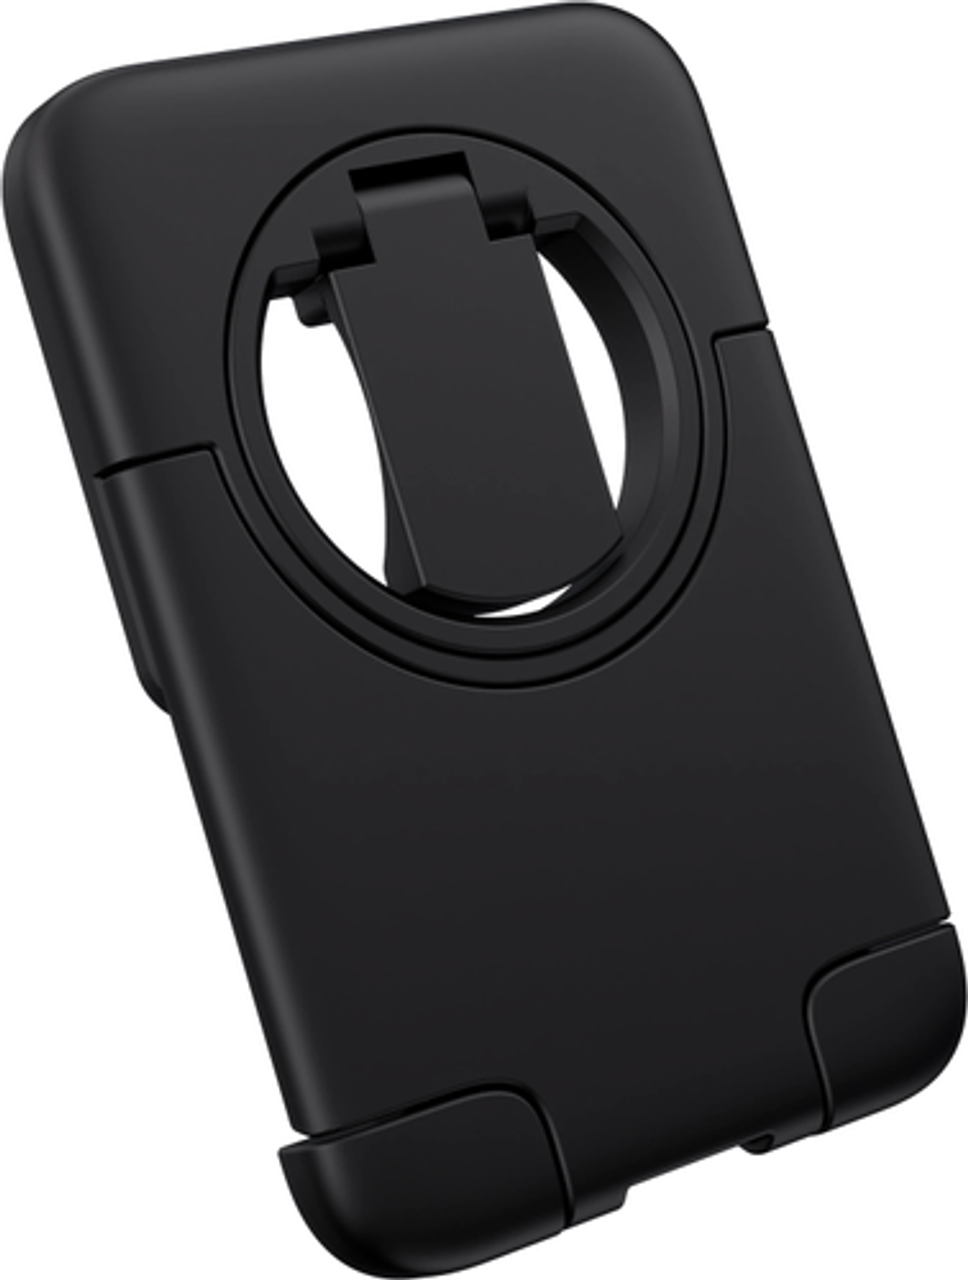 Speck - ClickLock StandyGrip for Apple iPhones with Magsafe - Black